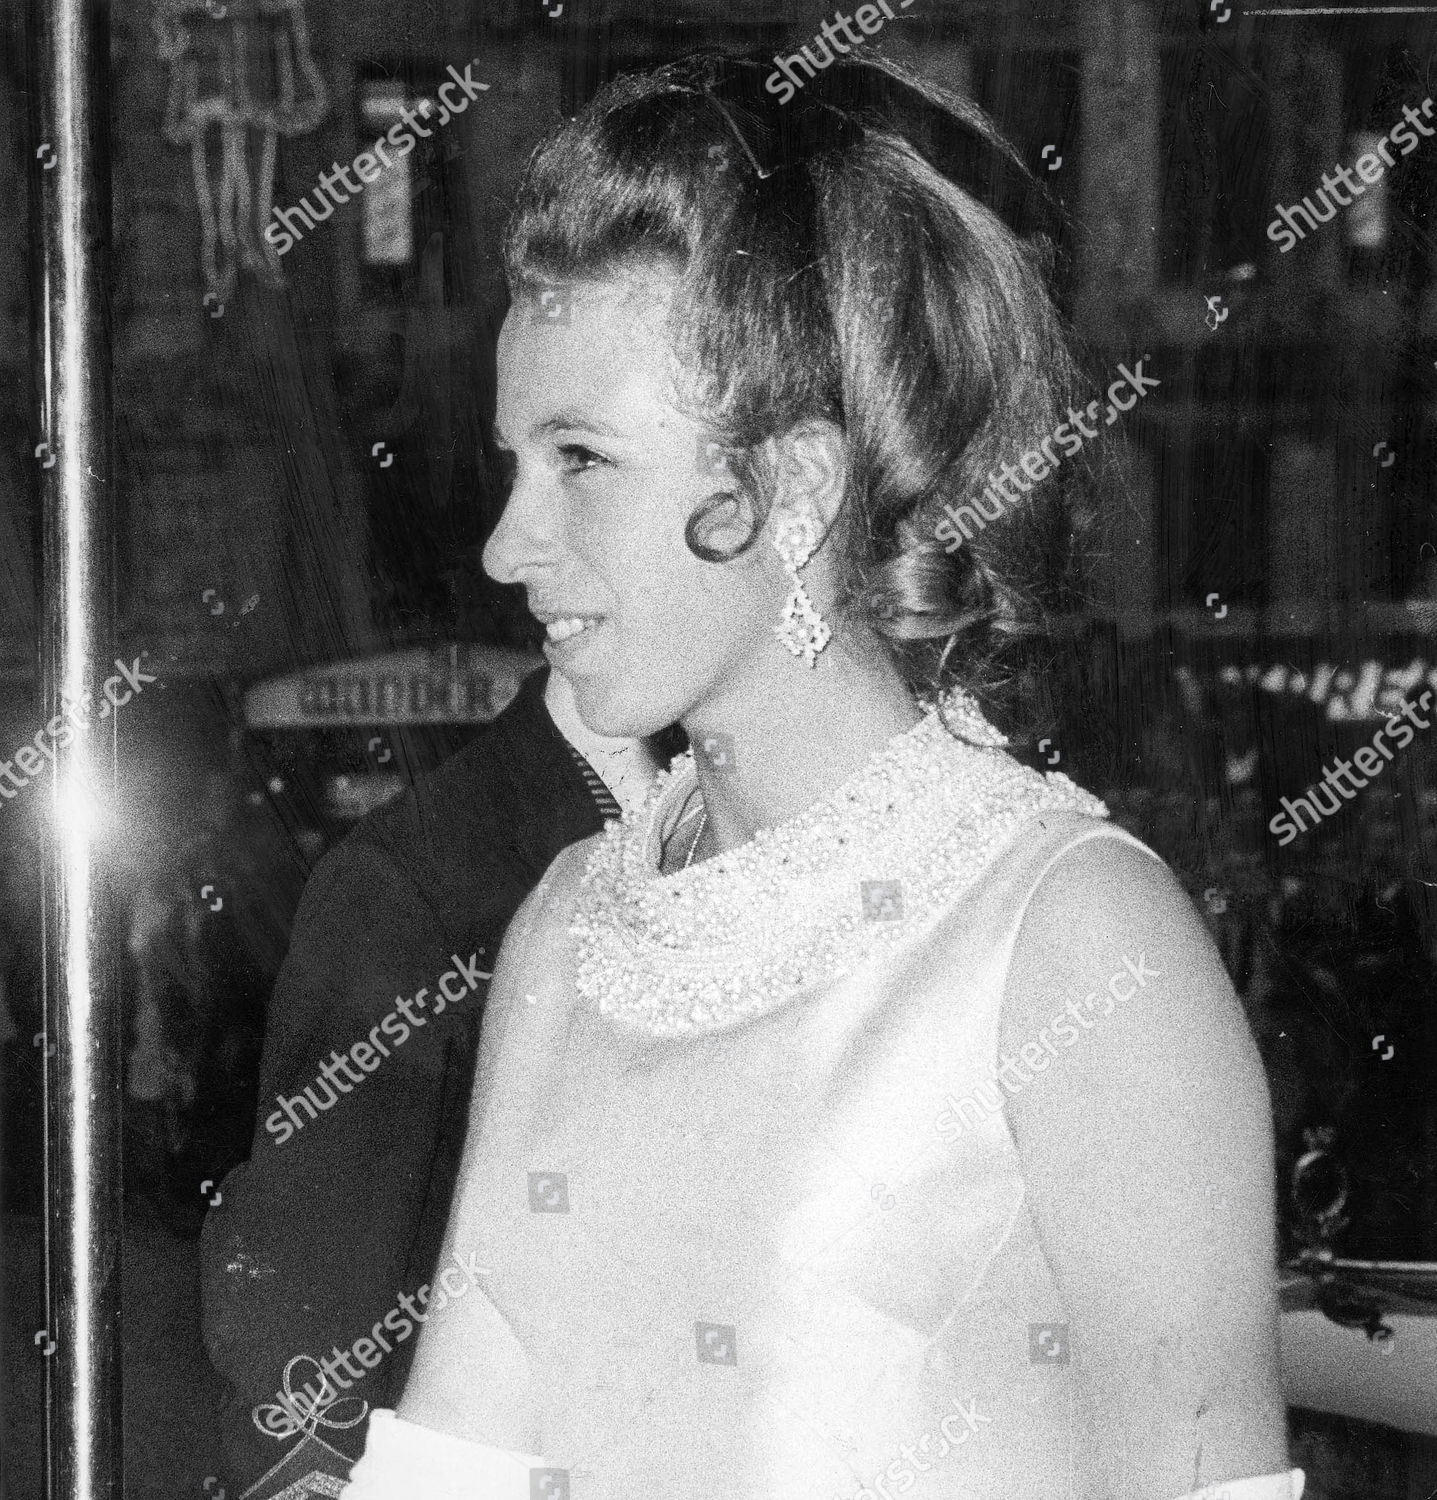 princess-anne-now-princess-royal-july-1969-princess-anne-at-the-premiere-of-alfred-the-great-at-the-empire-leicester-square-princess-anne-was-greated-by-a-trumpet-fanfare-when-she-arrived-for-the-royal-gala-peformance-of-alfred-the-great-at-th-shutterstock-editorial-890843a.jpg